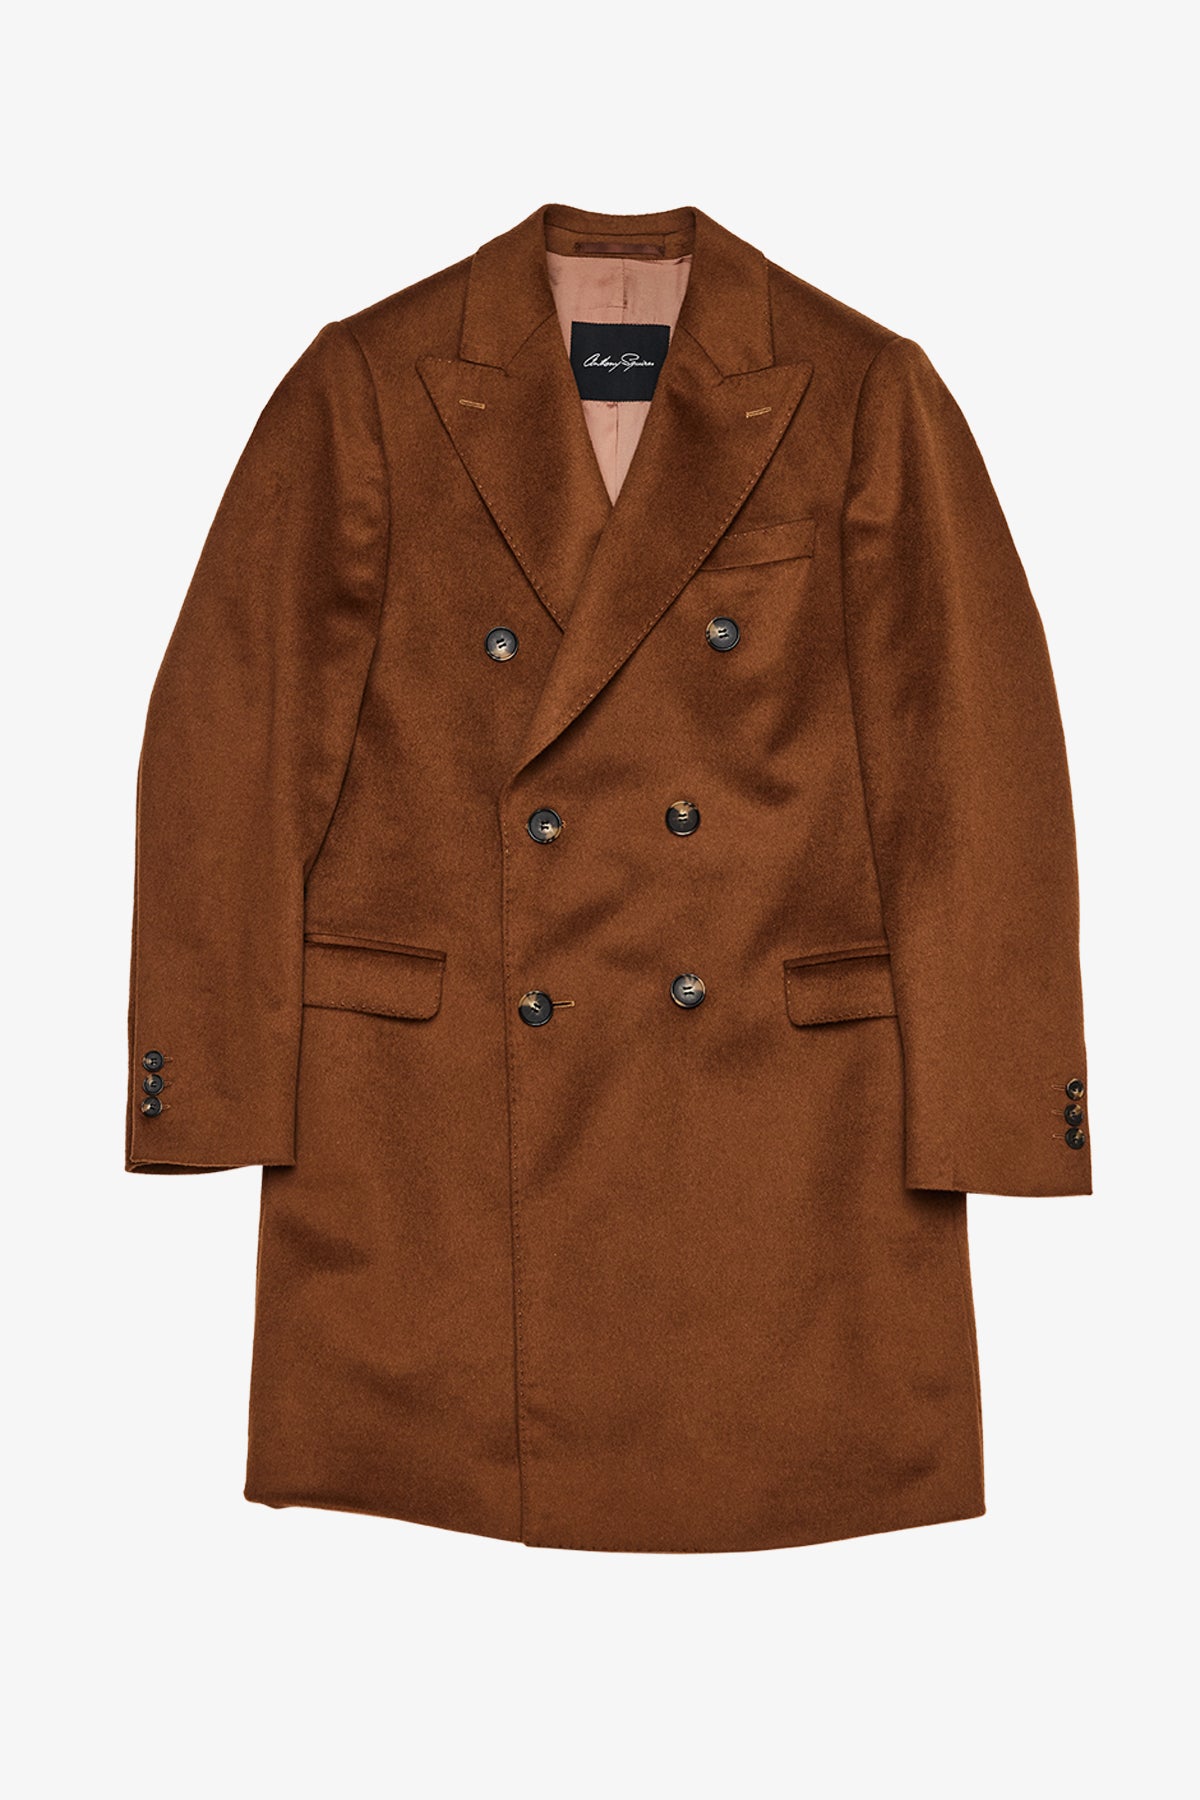 Elroy - Camel Double Breasted Overcoat